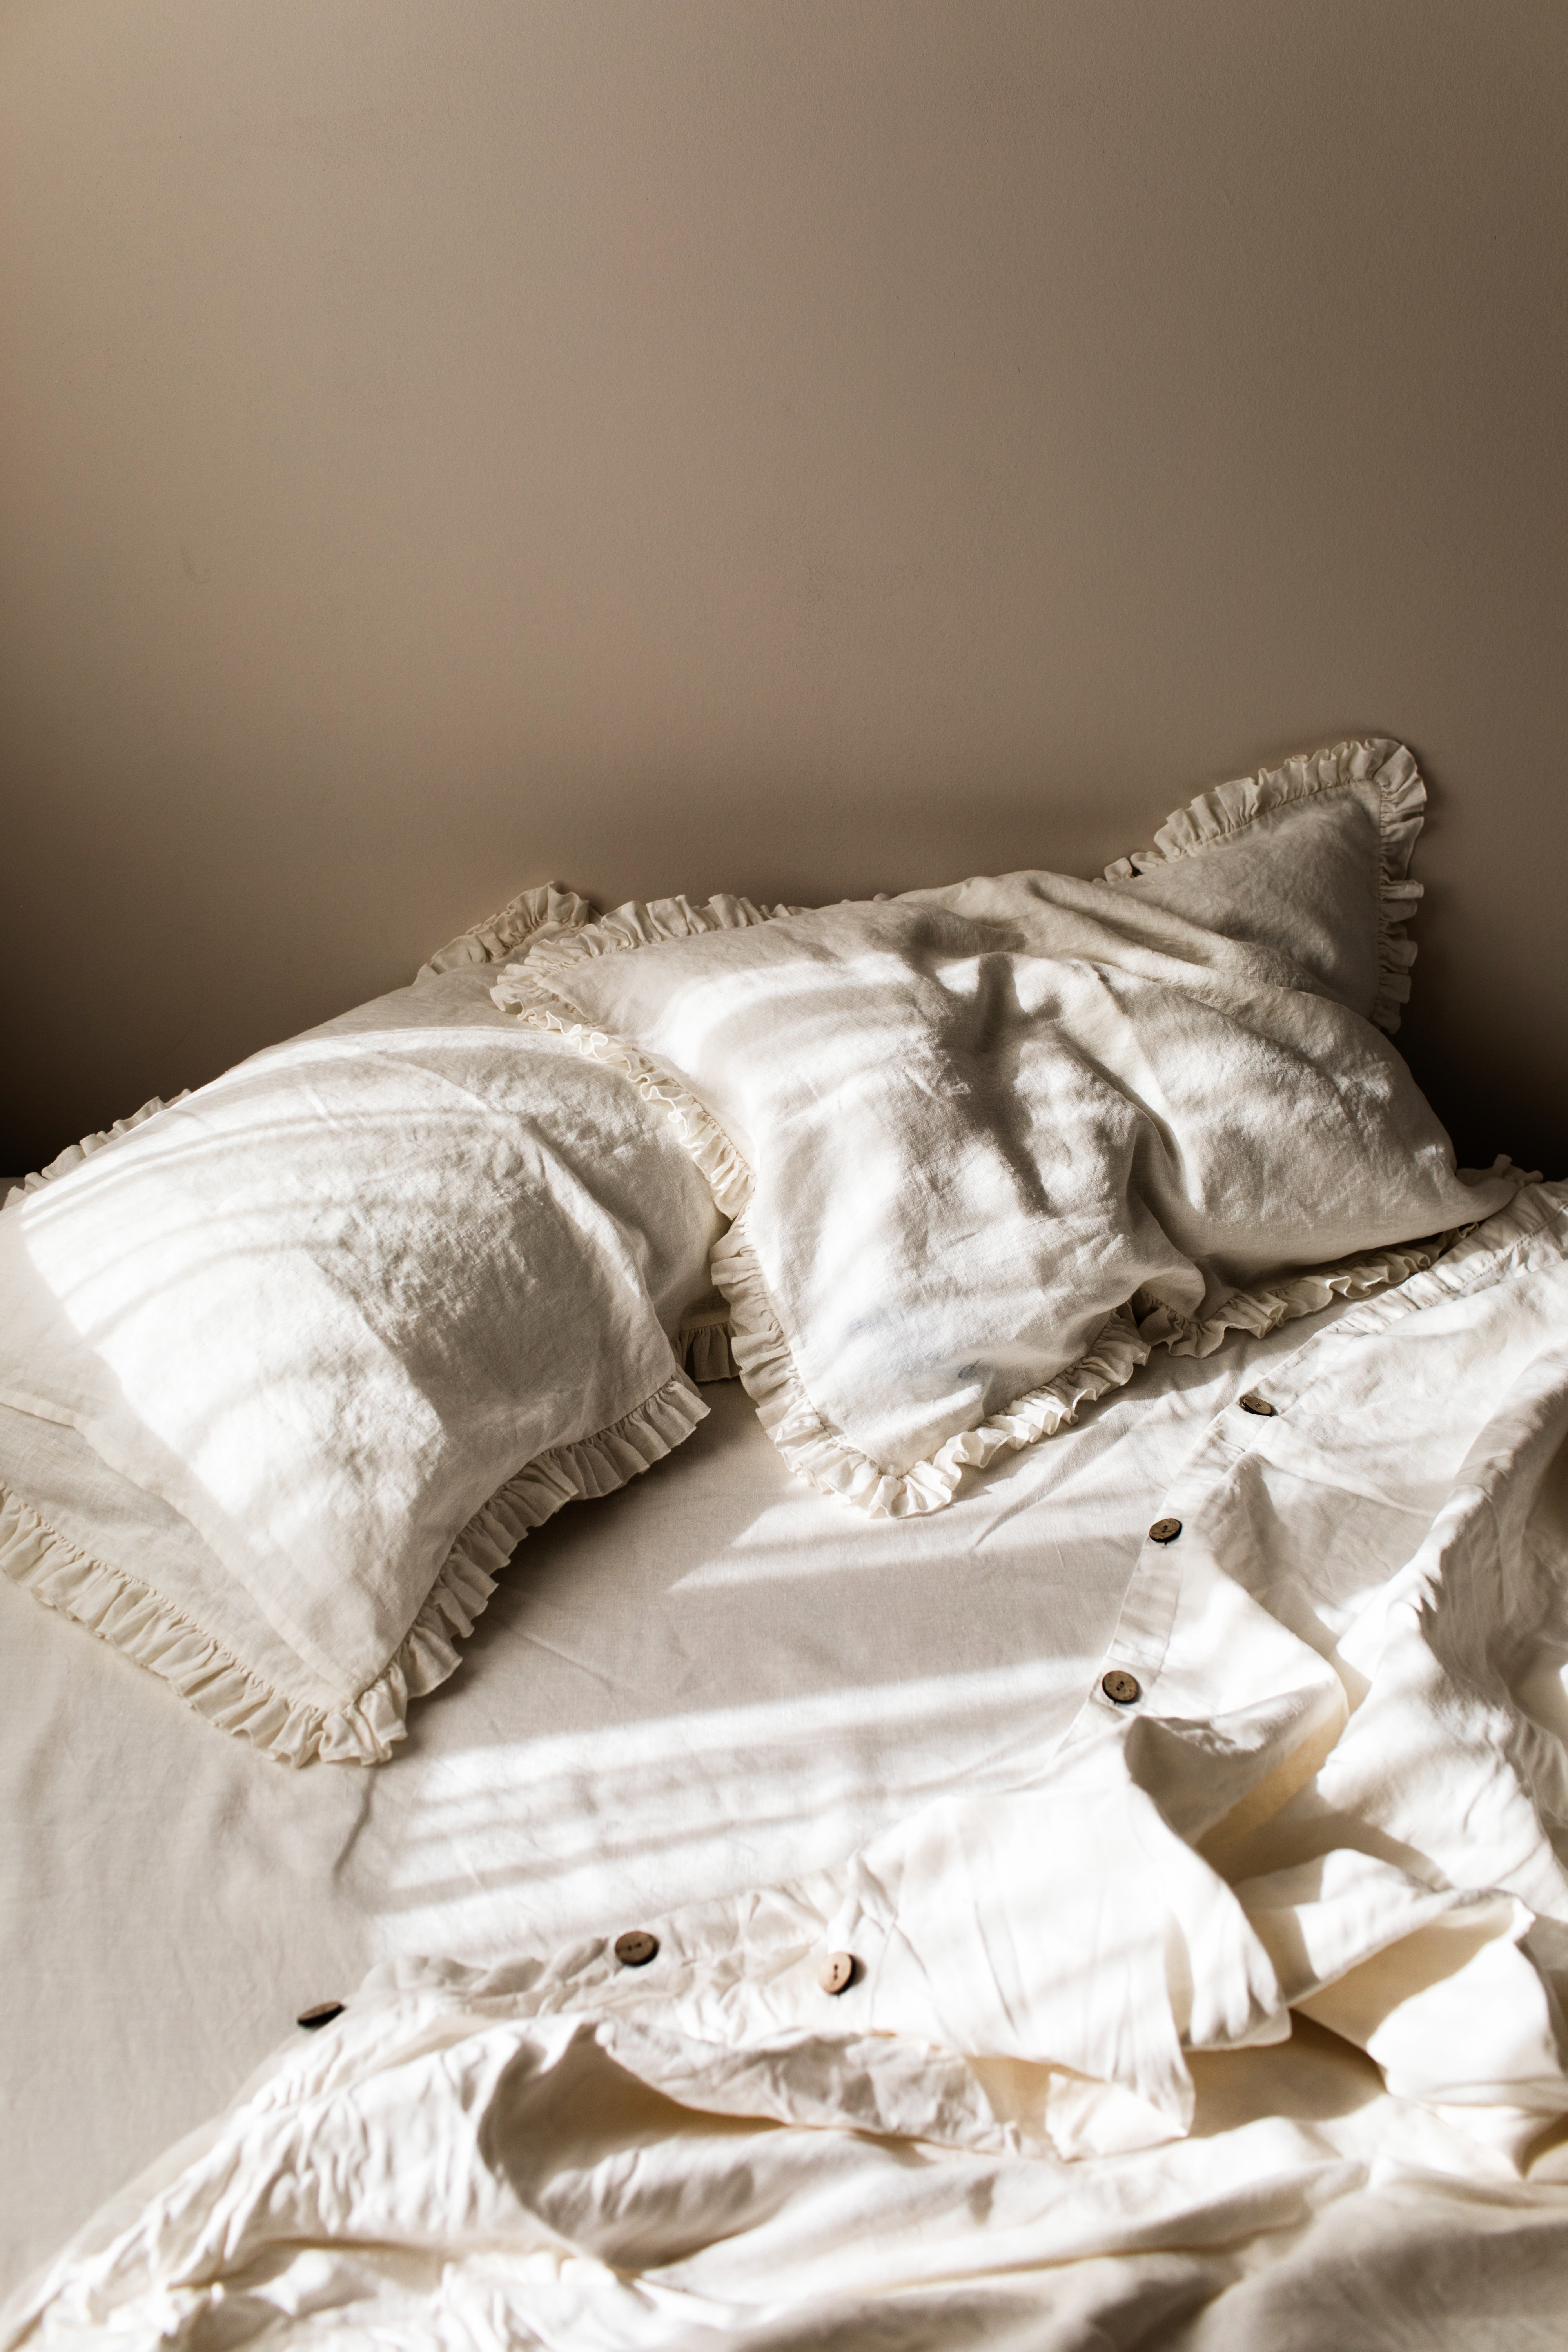 ruffled pillows on a bed